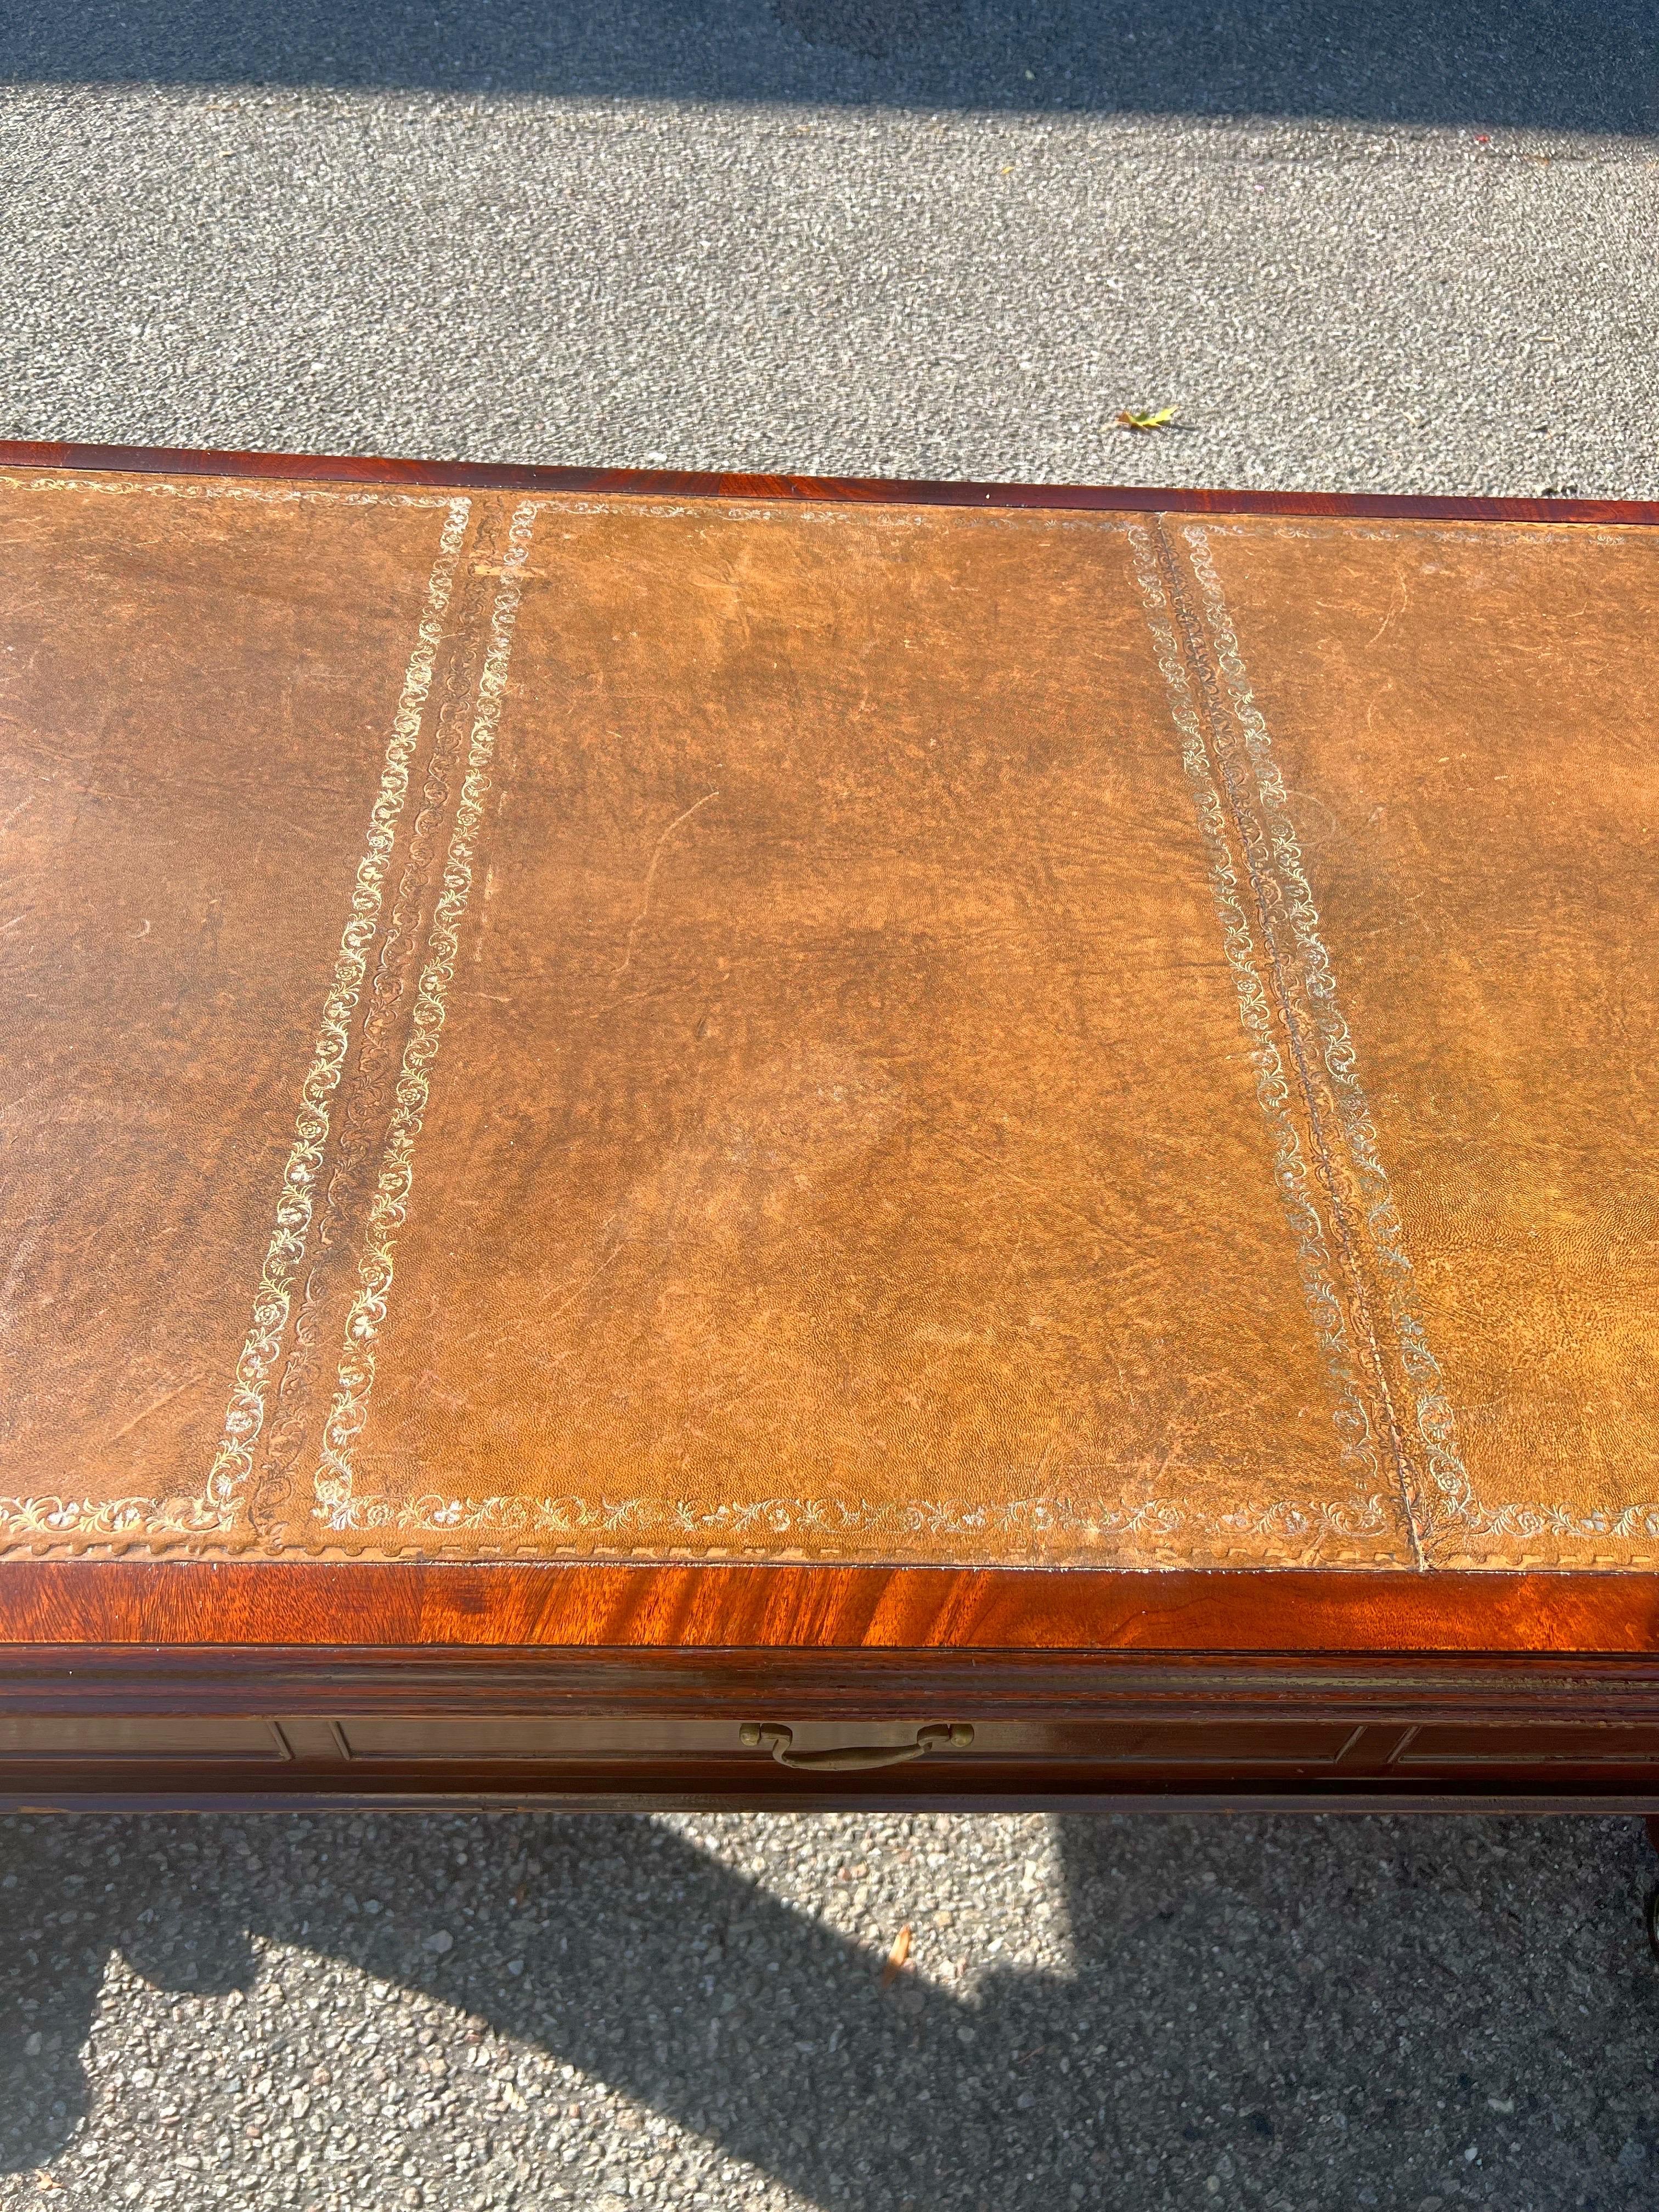 19th Century English Regency Mahogany Leather Top Writing Desk For Sale 9